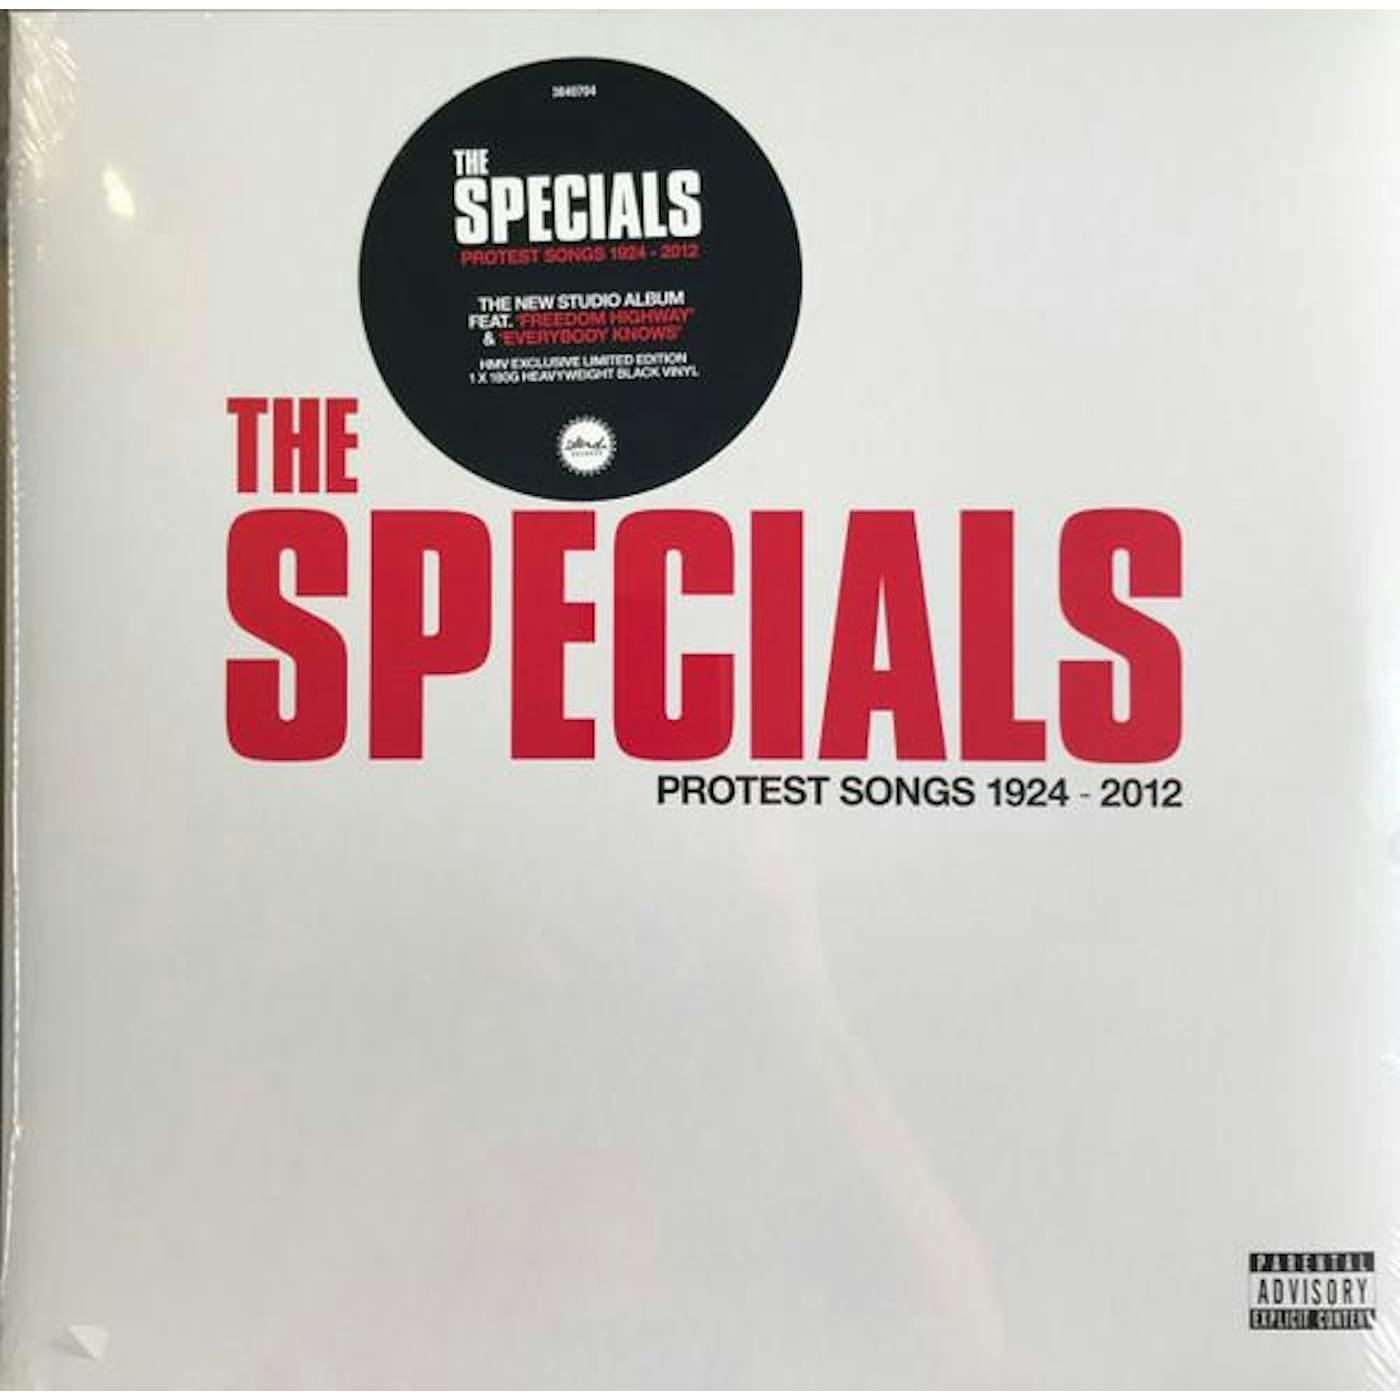 The Specials PROTEST SONGS 1924-2012 Vinyl Record